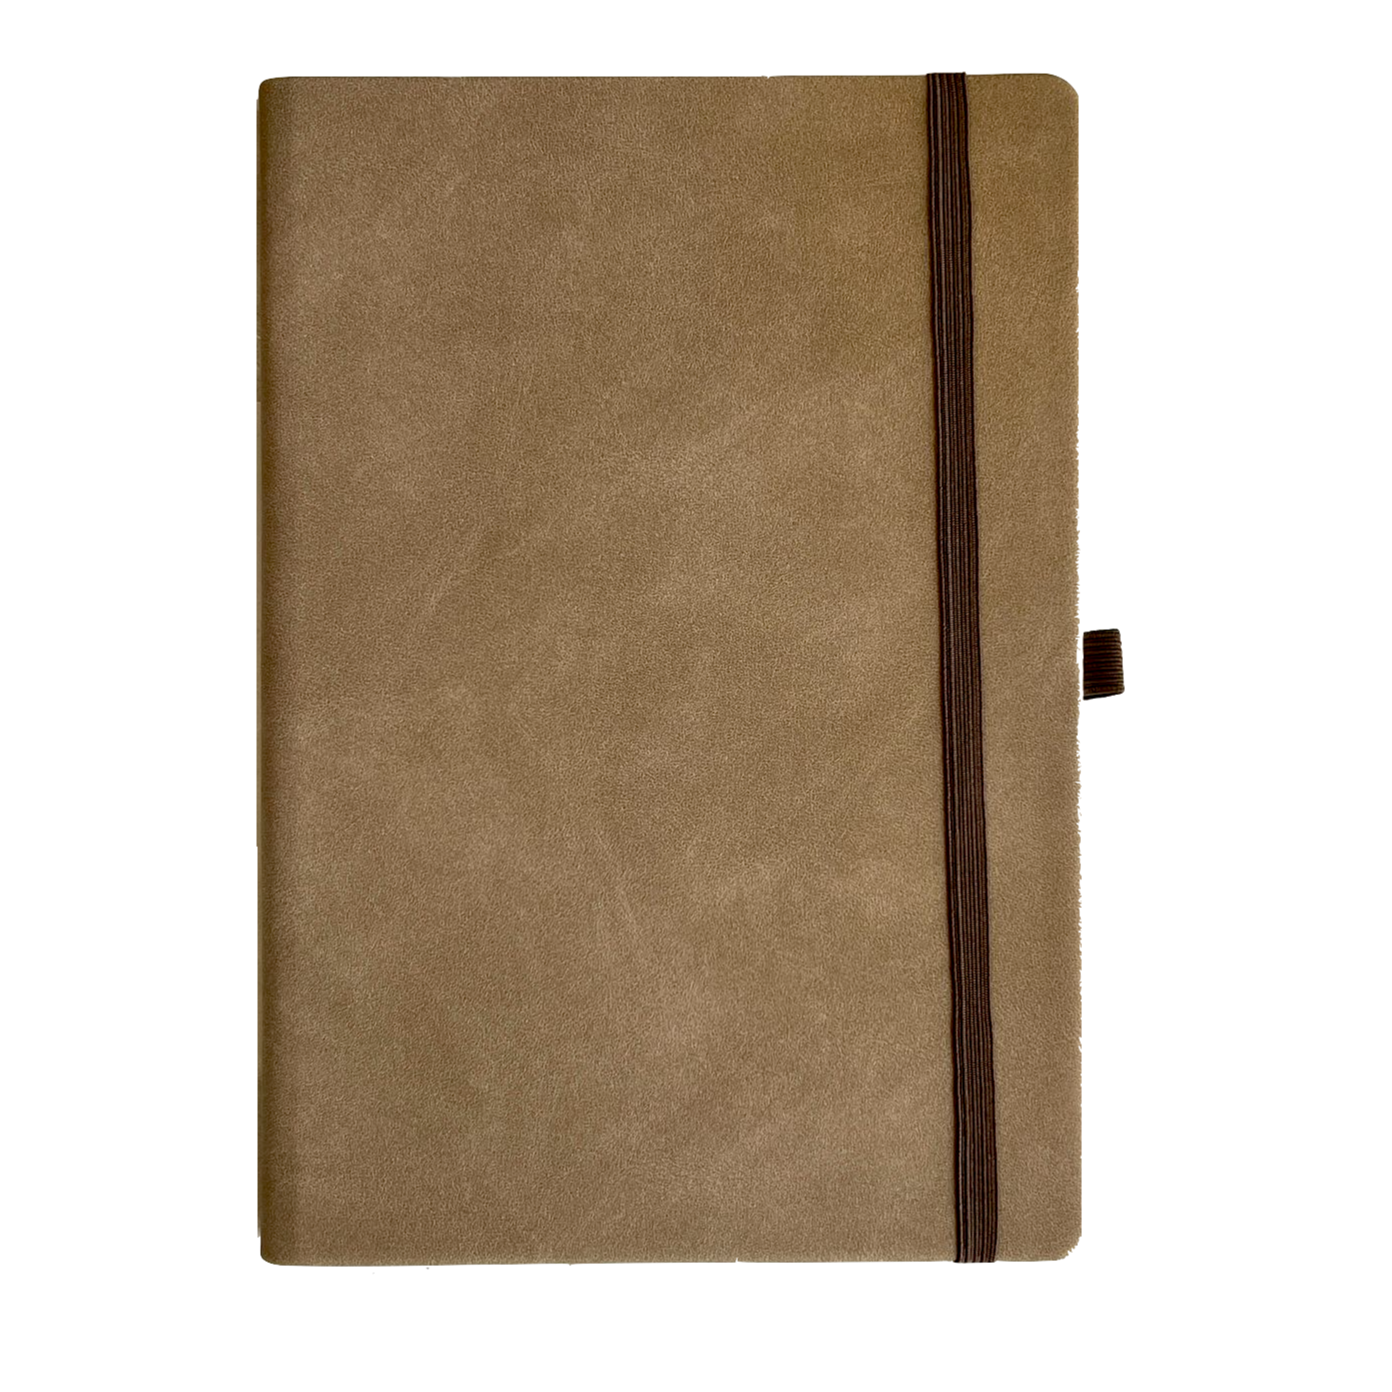 Vegan Suede Light Tan with Elastic Band Notebook